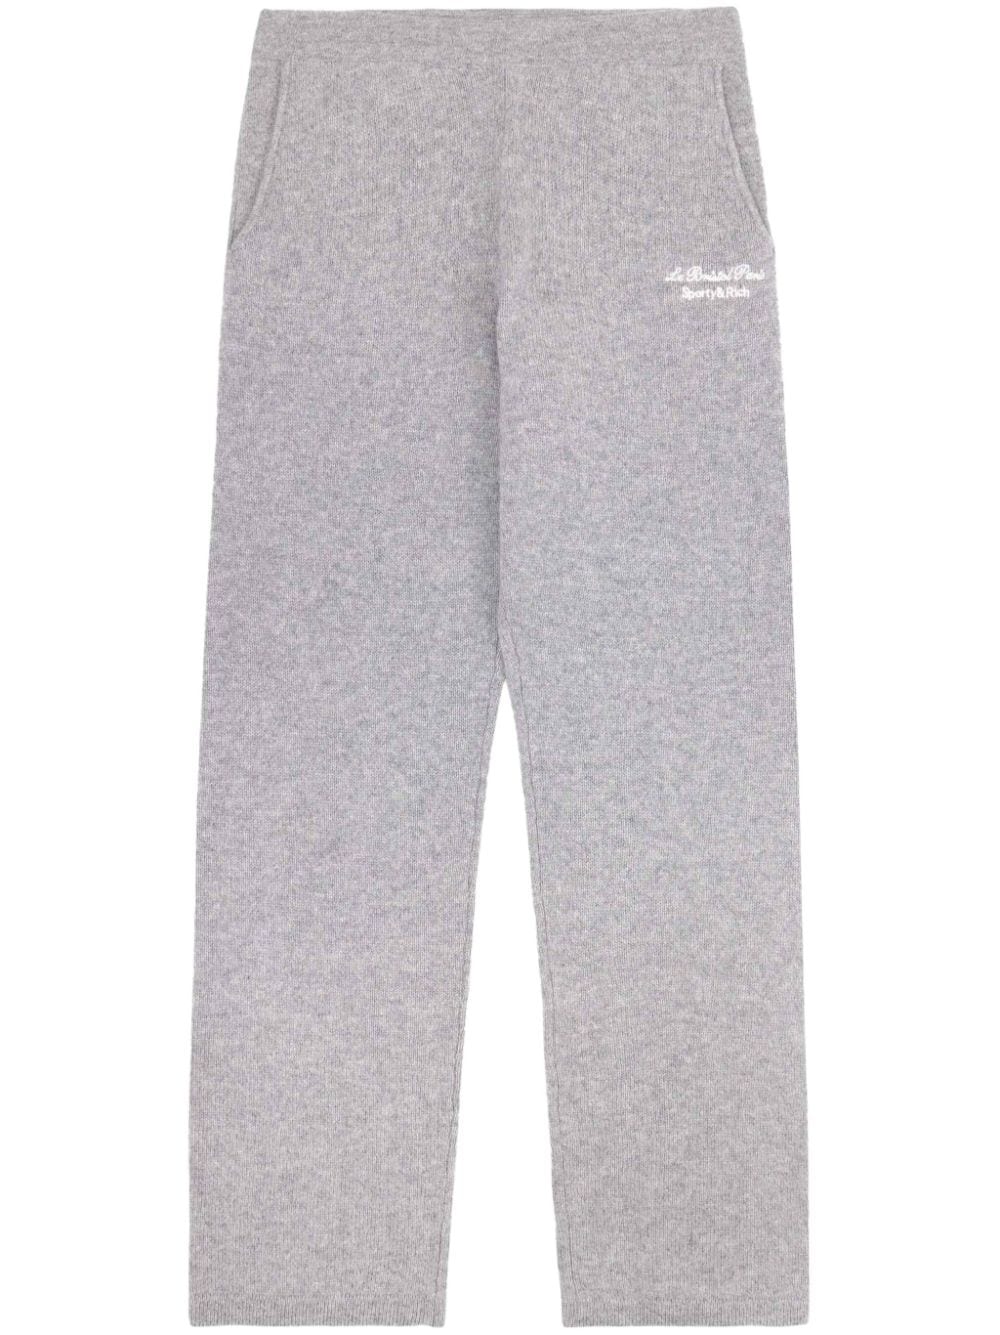 Faubourg cashmere track pants